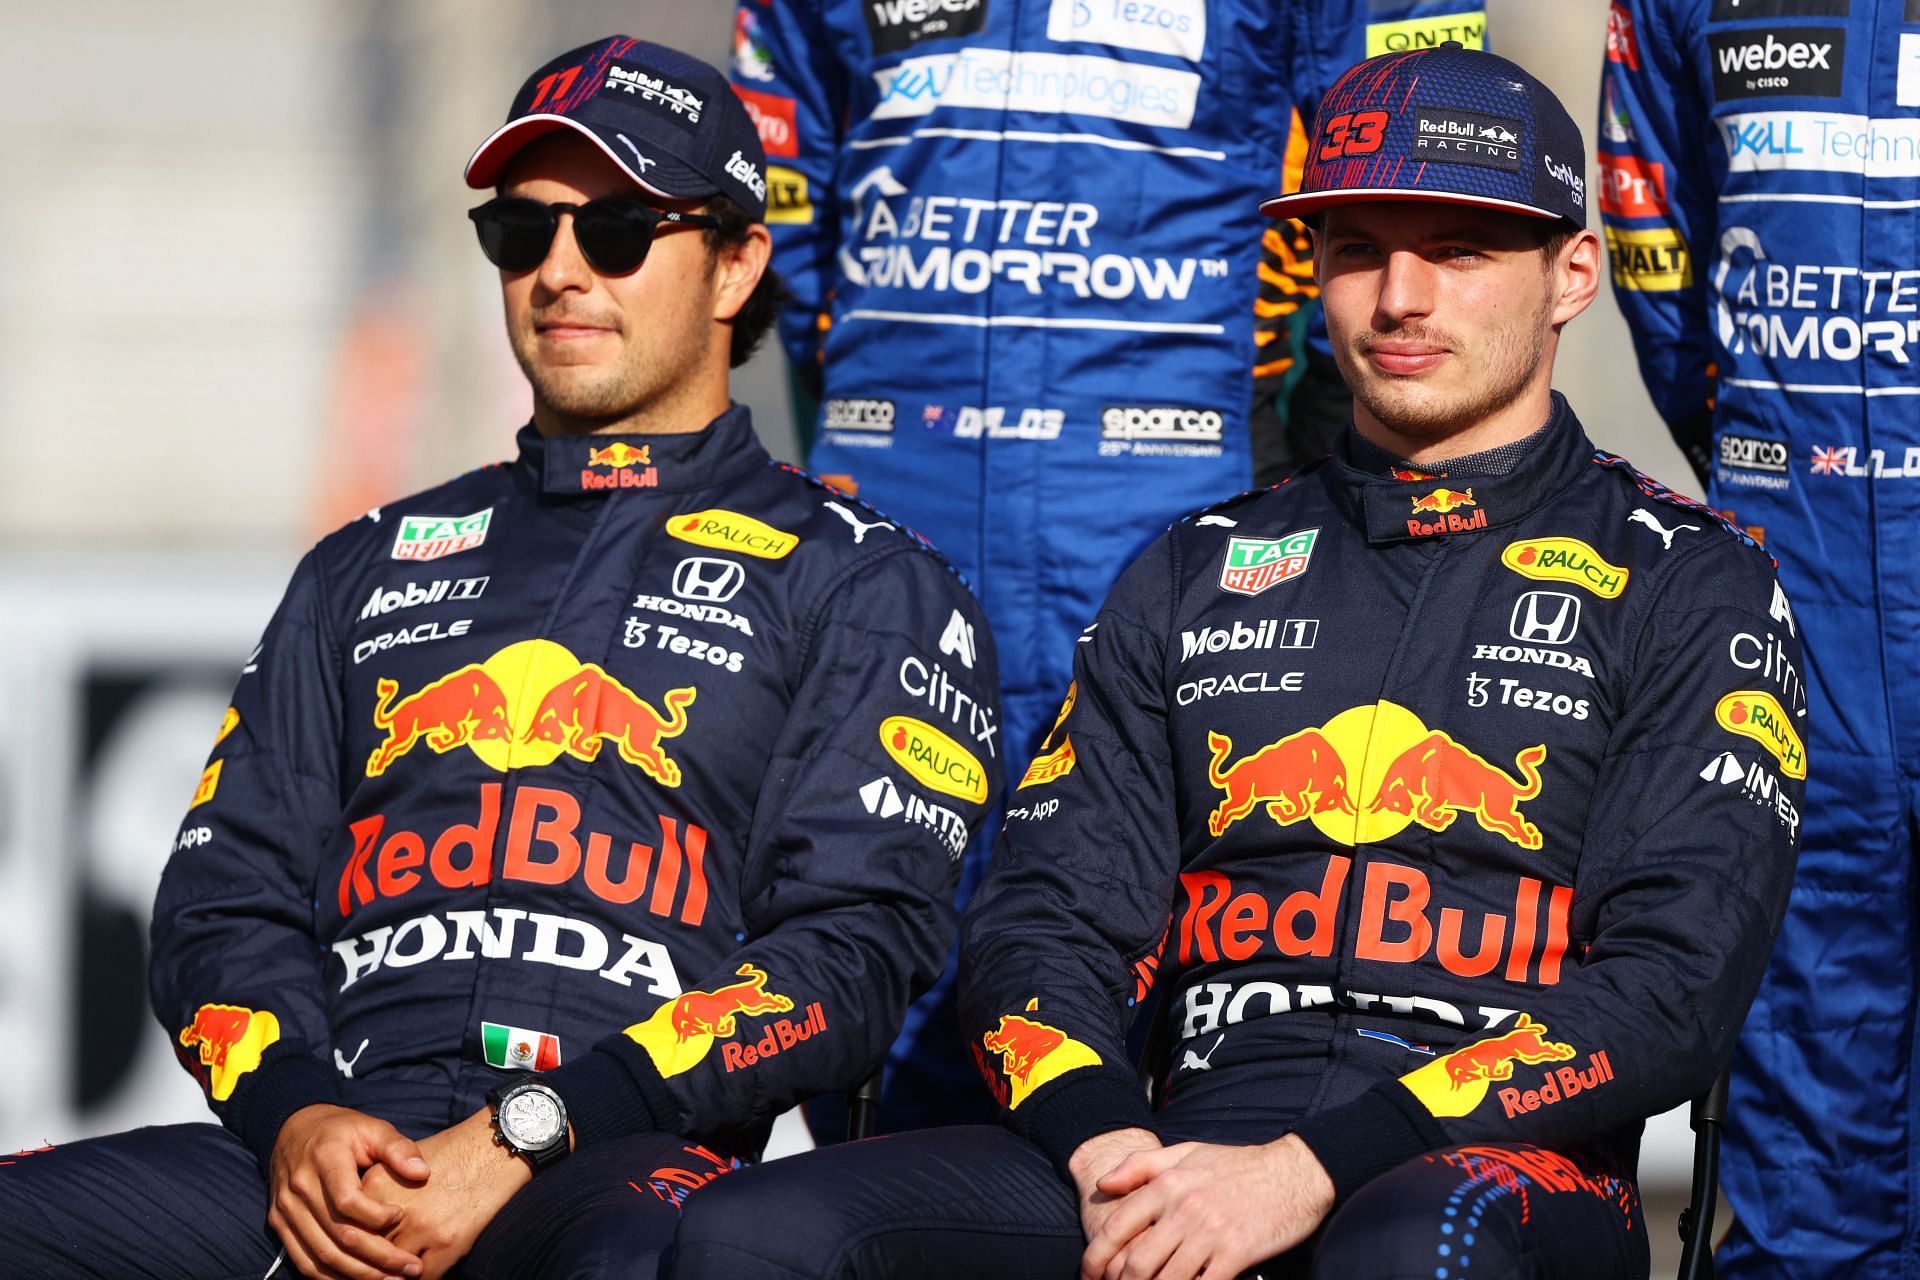 Max Verstappen and Sergio Perez at the 2021 F1 Grand Prix of Abu Dhabi